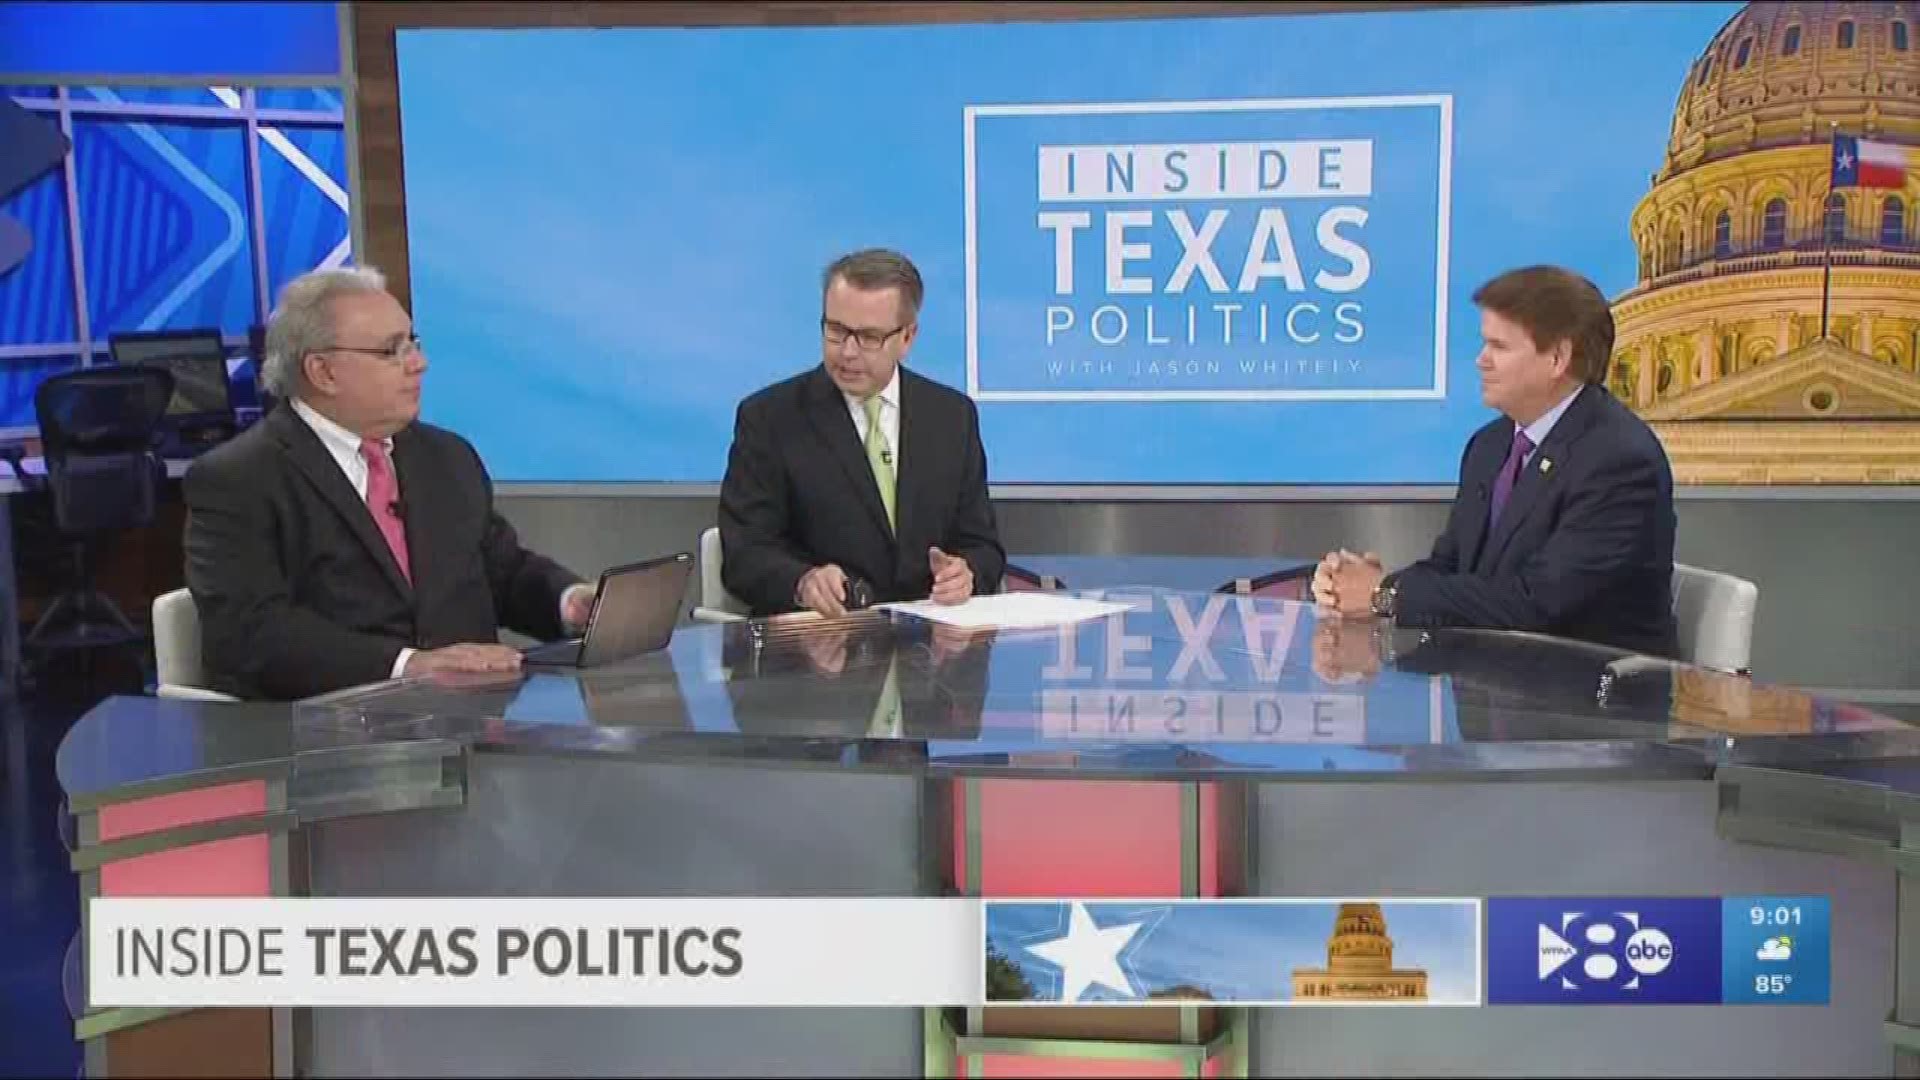 Inside Texas Politics began with Arlington Mayor Jeff Williams in studio to weigh in on the push for term limits for the Arlington mayor and city council. Arlington was named the best run city in Texas. And has added more jobs in the last two years than a